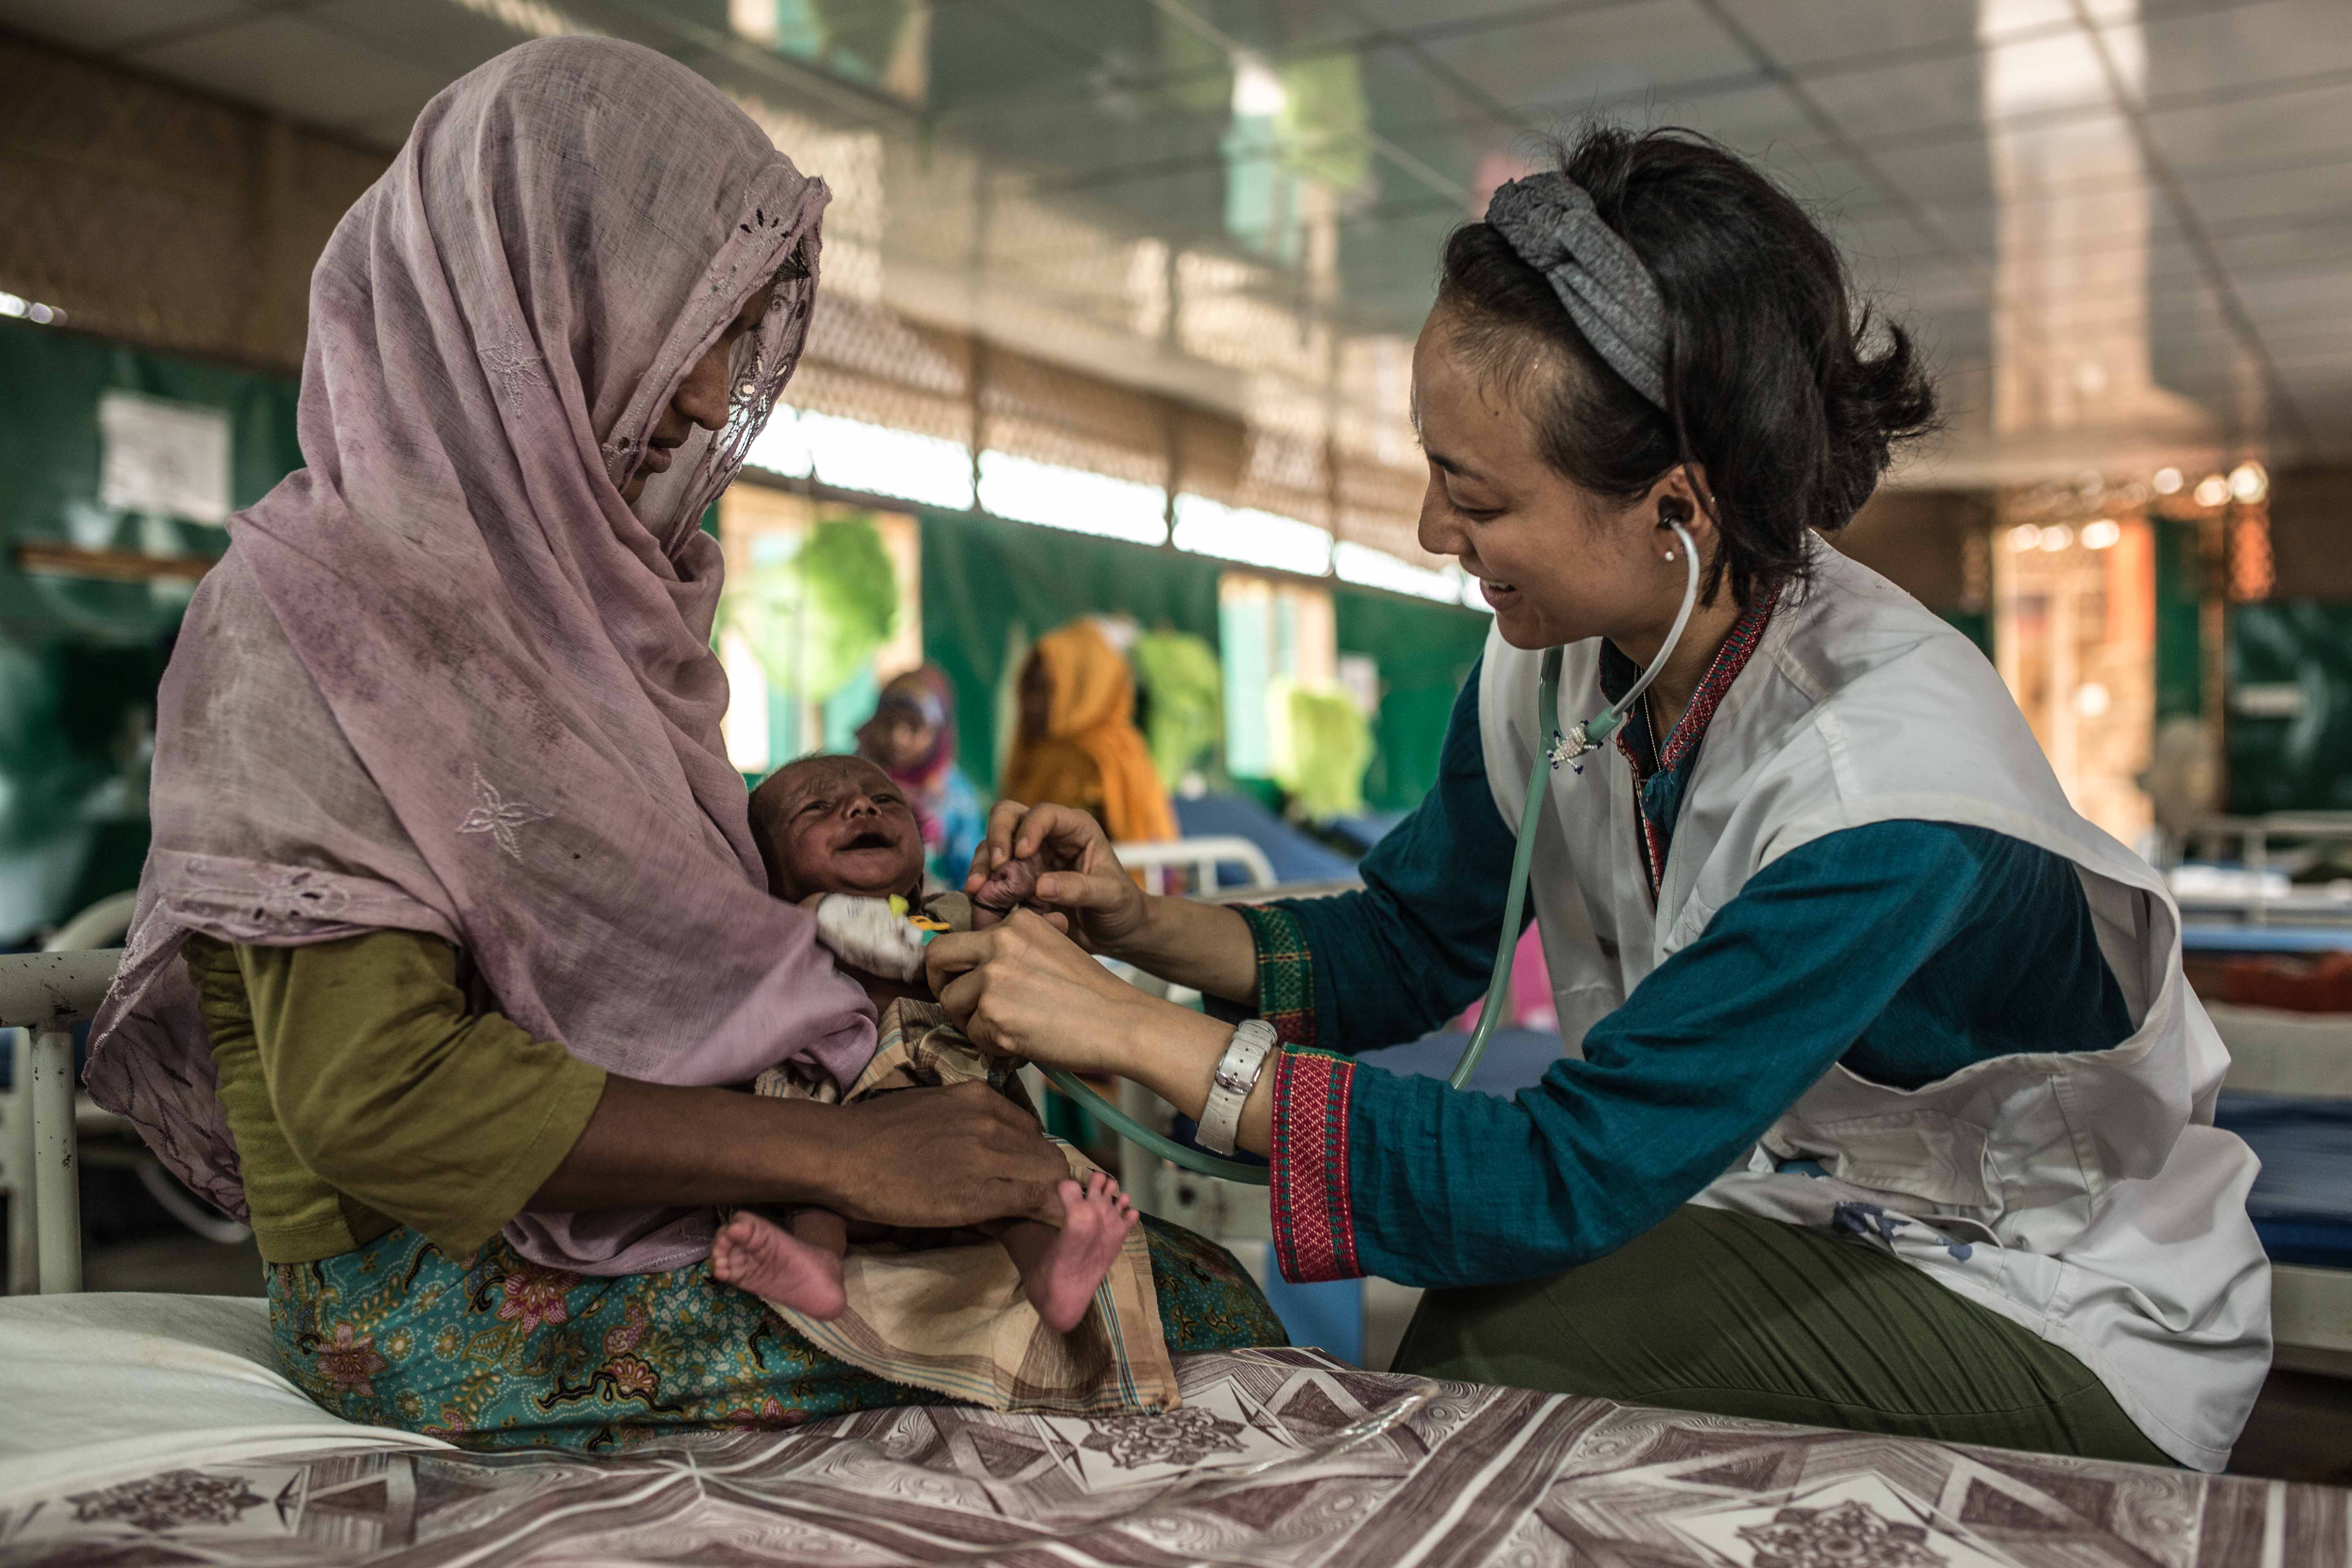 © Pablo Tosco/Angular  Rozia and her two-month-old son Zubair receive care in the MSF hospital in Goyalmara, Rohingya refugee camp in south-eastern Bangladesh.